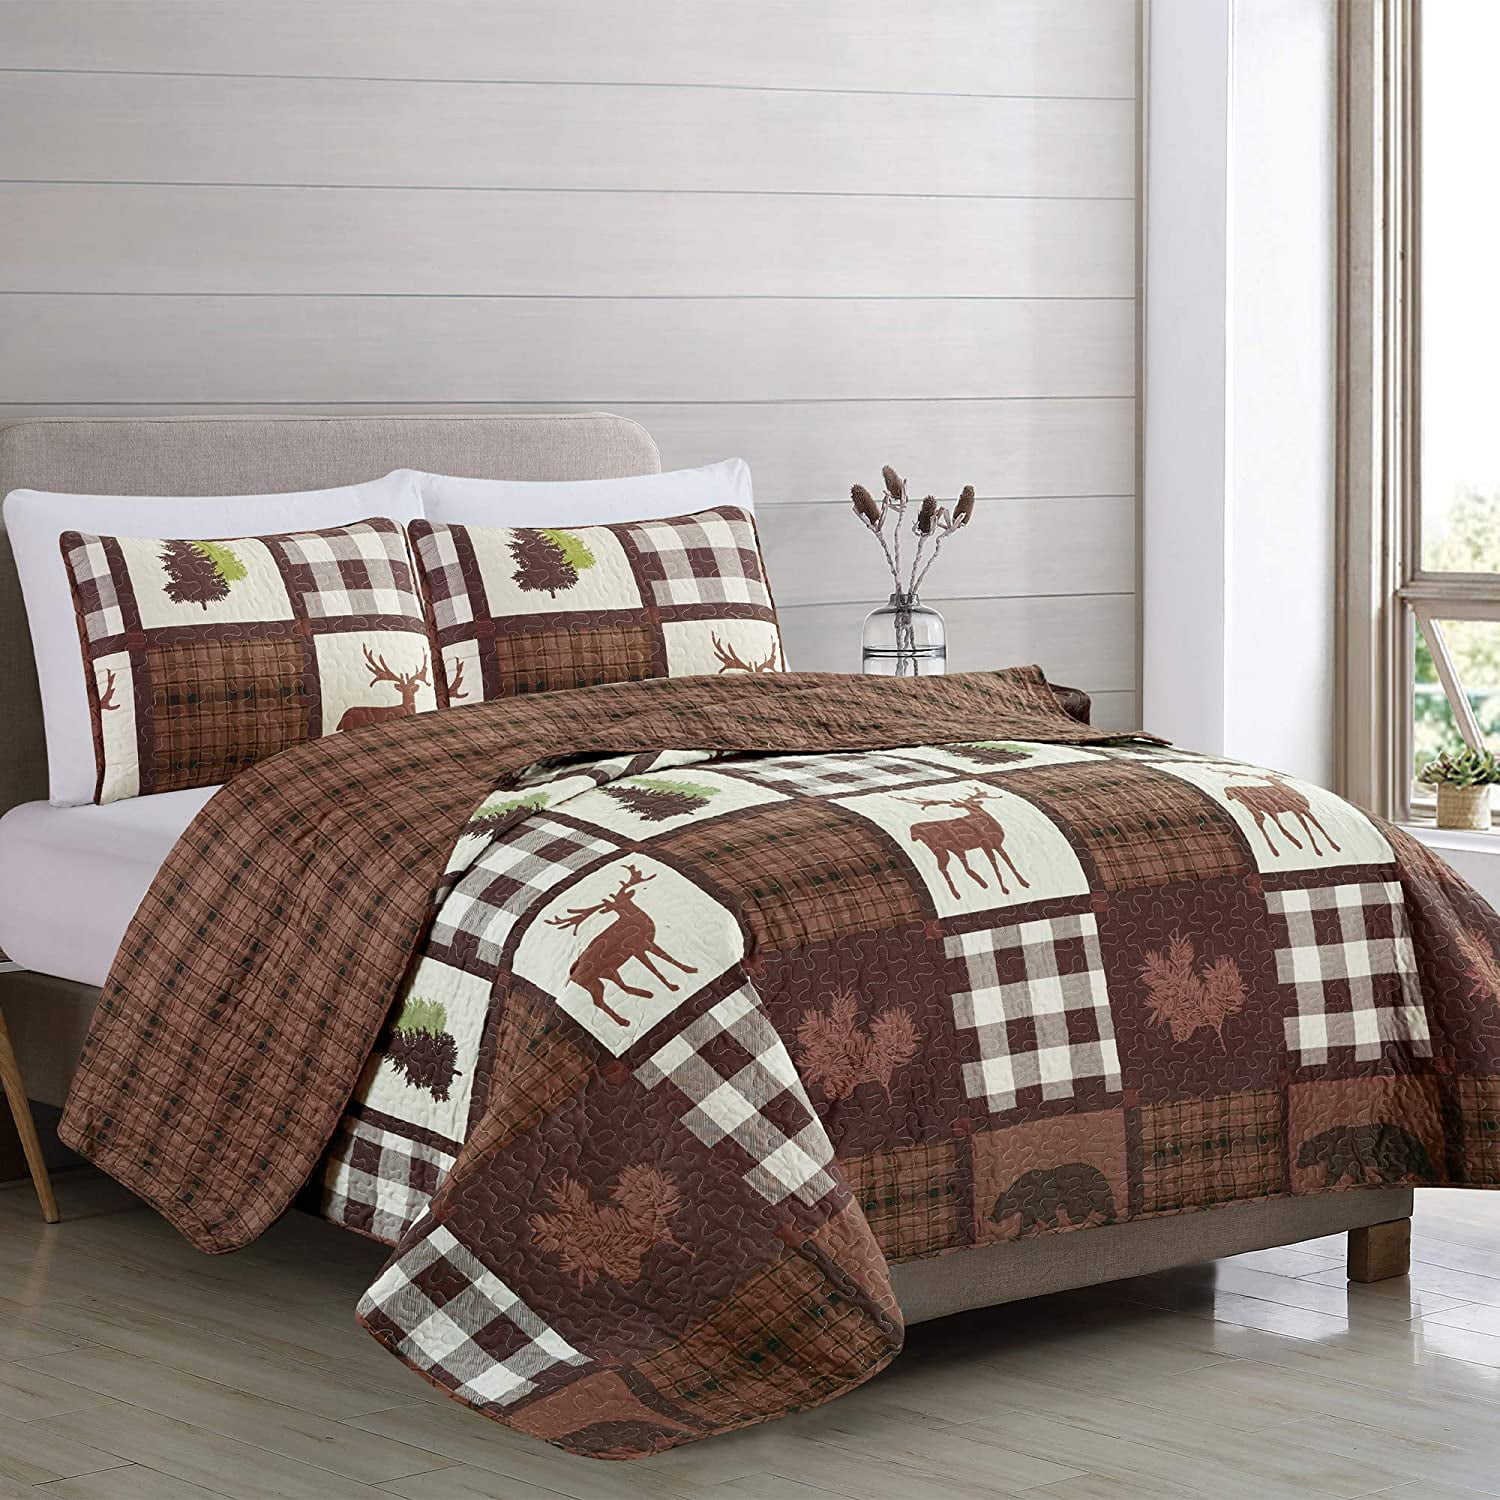 CABIN COUNTRY MOUNTAIN BEAR DEER FISH LAKE and LODGE 2pc Twin QUILT SET 